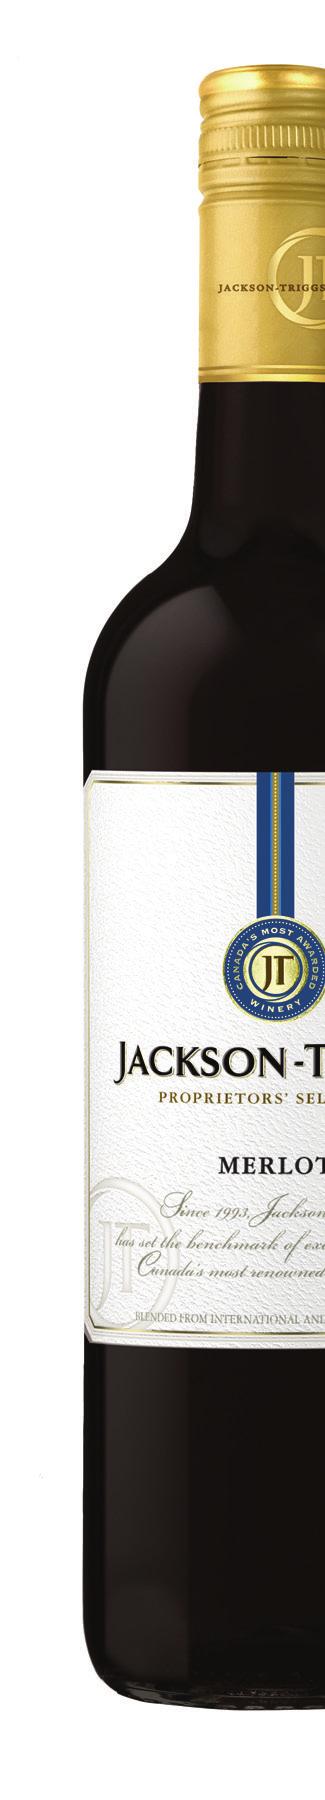 Red Wine MERLOT Jackson-Triggs Proprietors Selection, BC Aromas of fruit and herbal notes make up this smooth, full bodied wine with a velvety finish. glass $6. 00 ½ L $16. 75 litre $33.